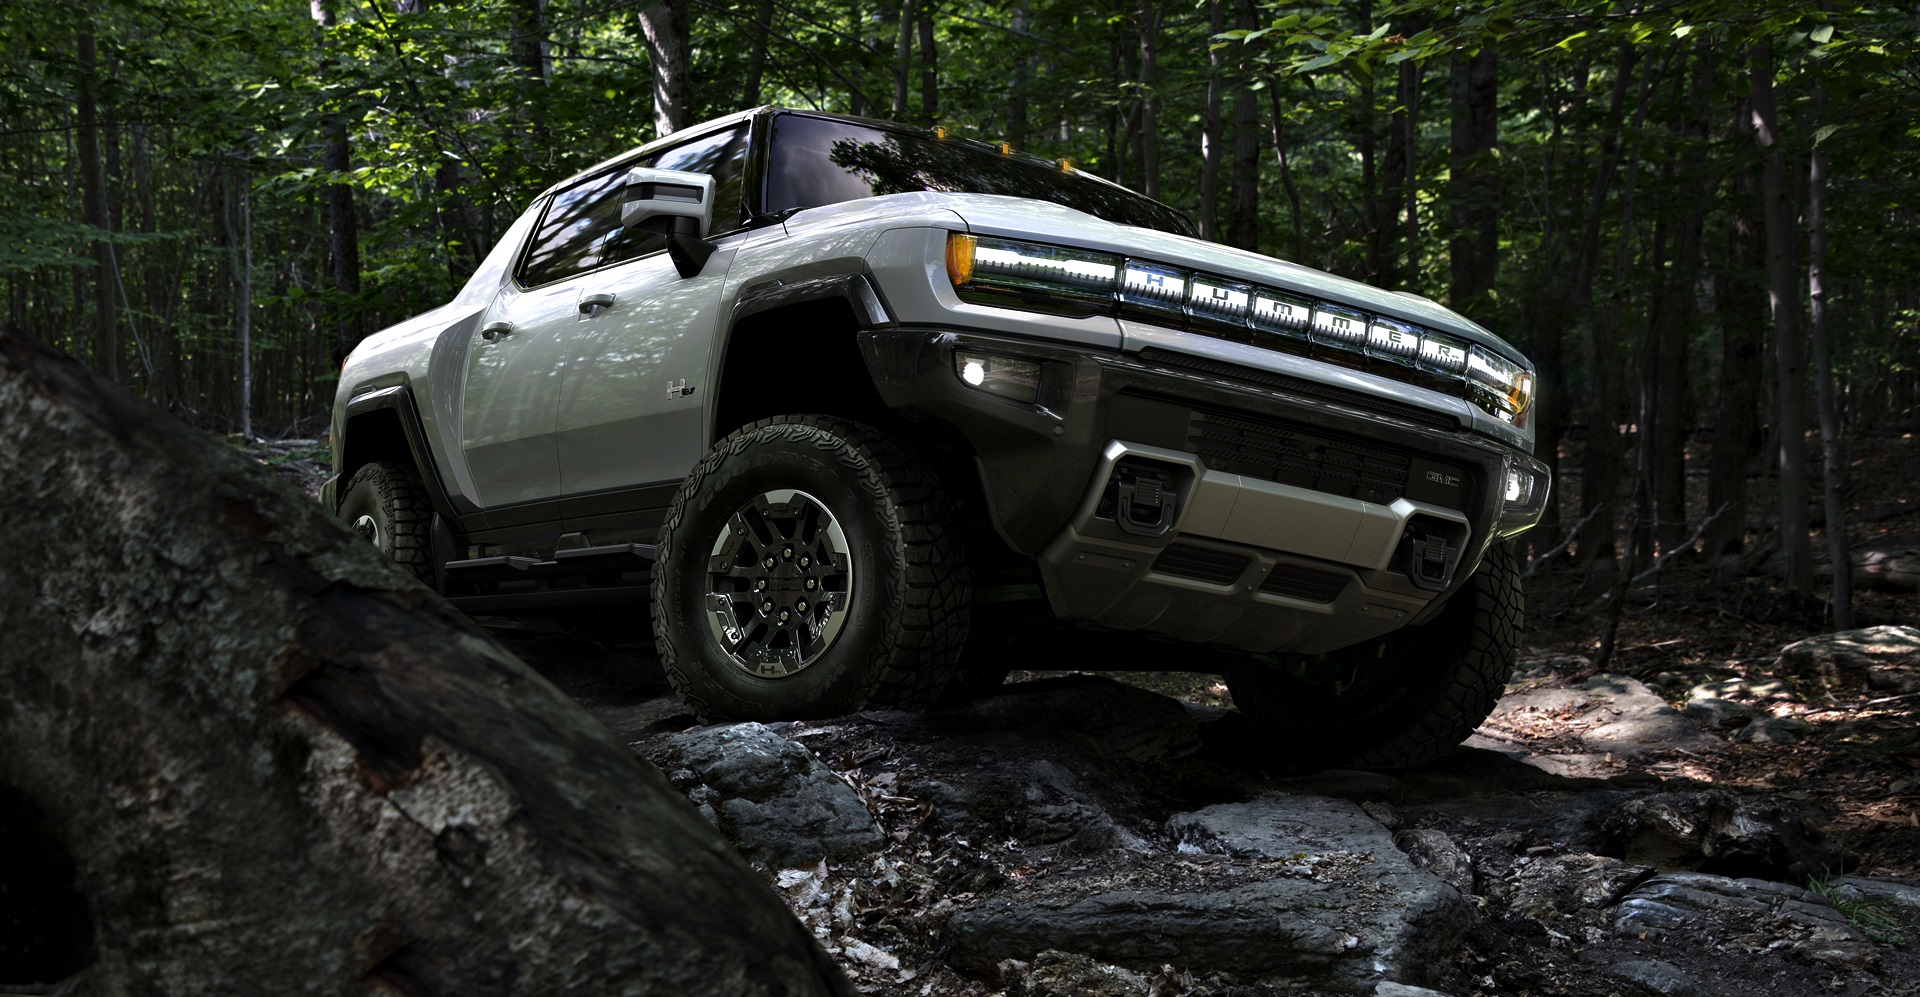 The 2022 Gmc Hummer Ev Is Designed To Be An Off Road Beast, With